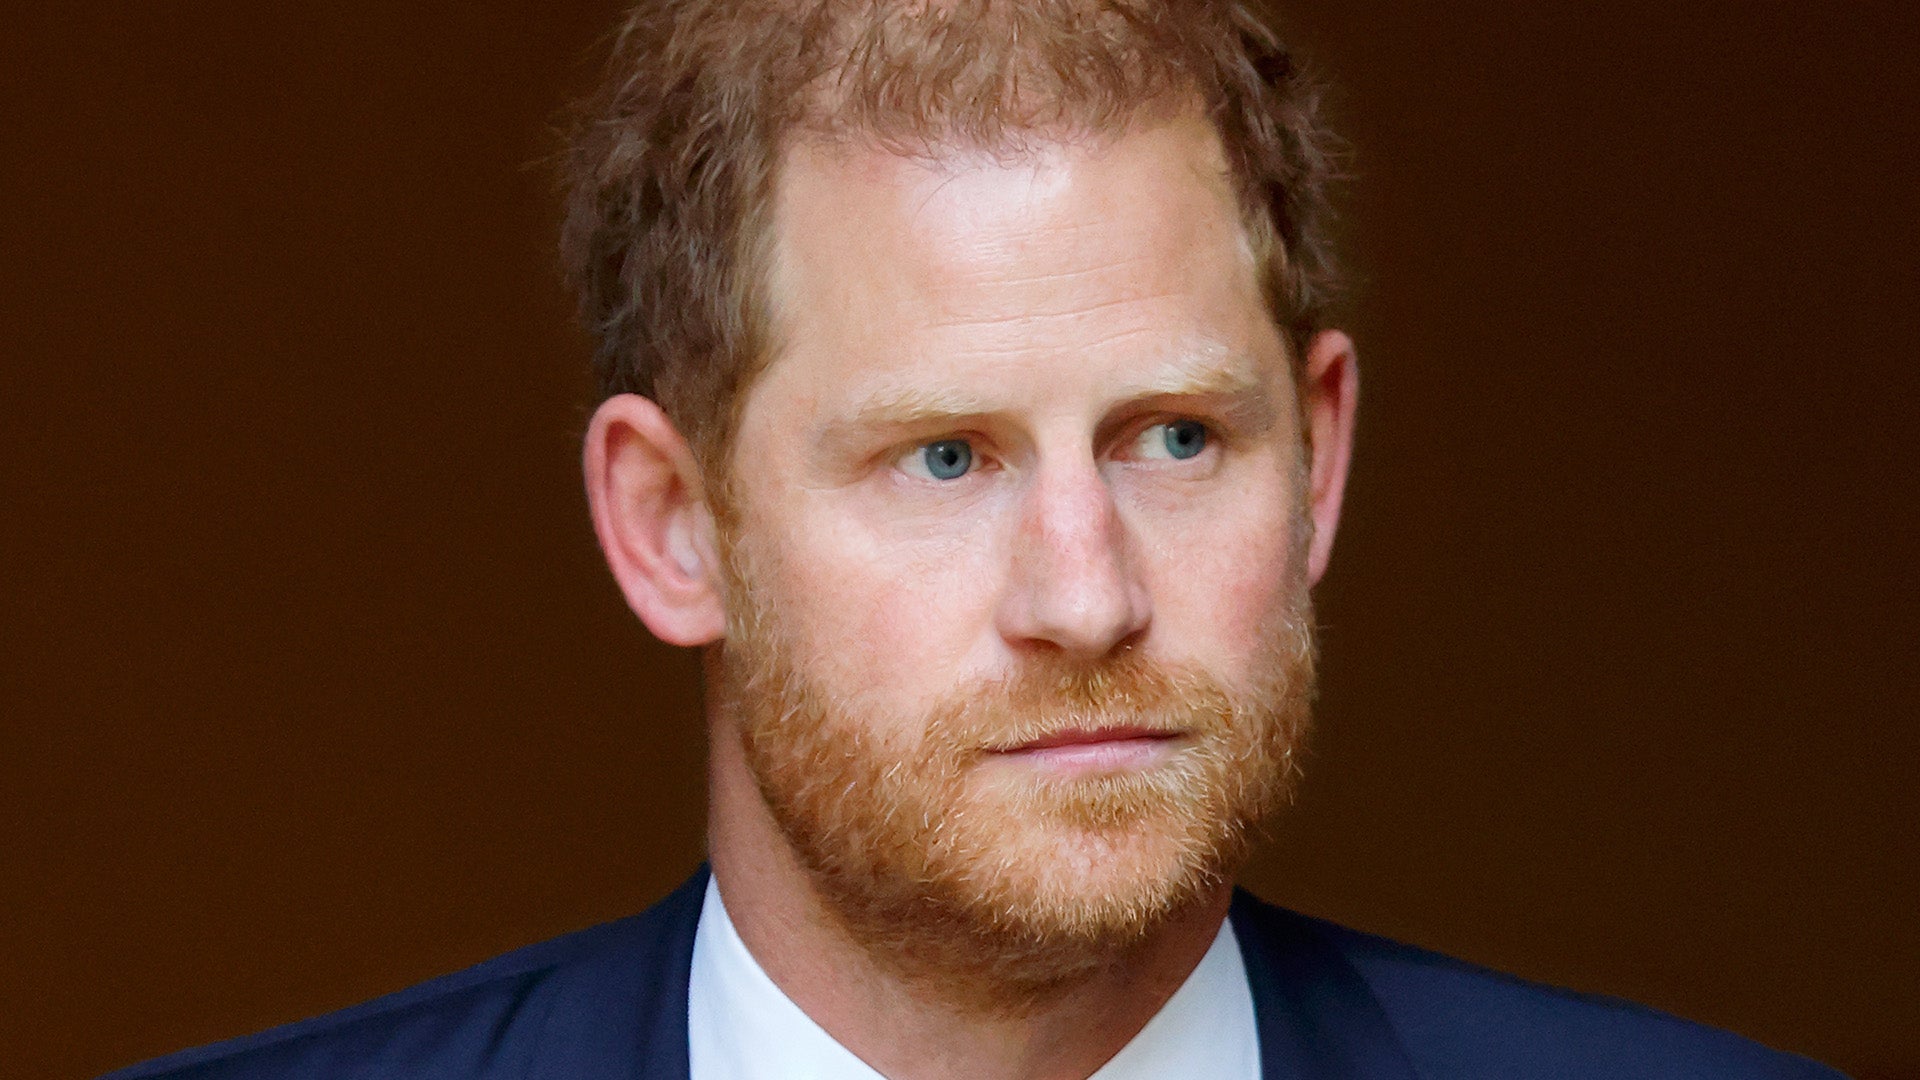 Prince Harry Accused of Destroying Evidence in Lawsuit